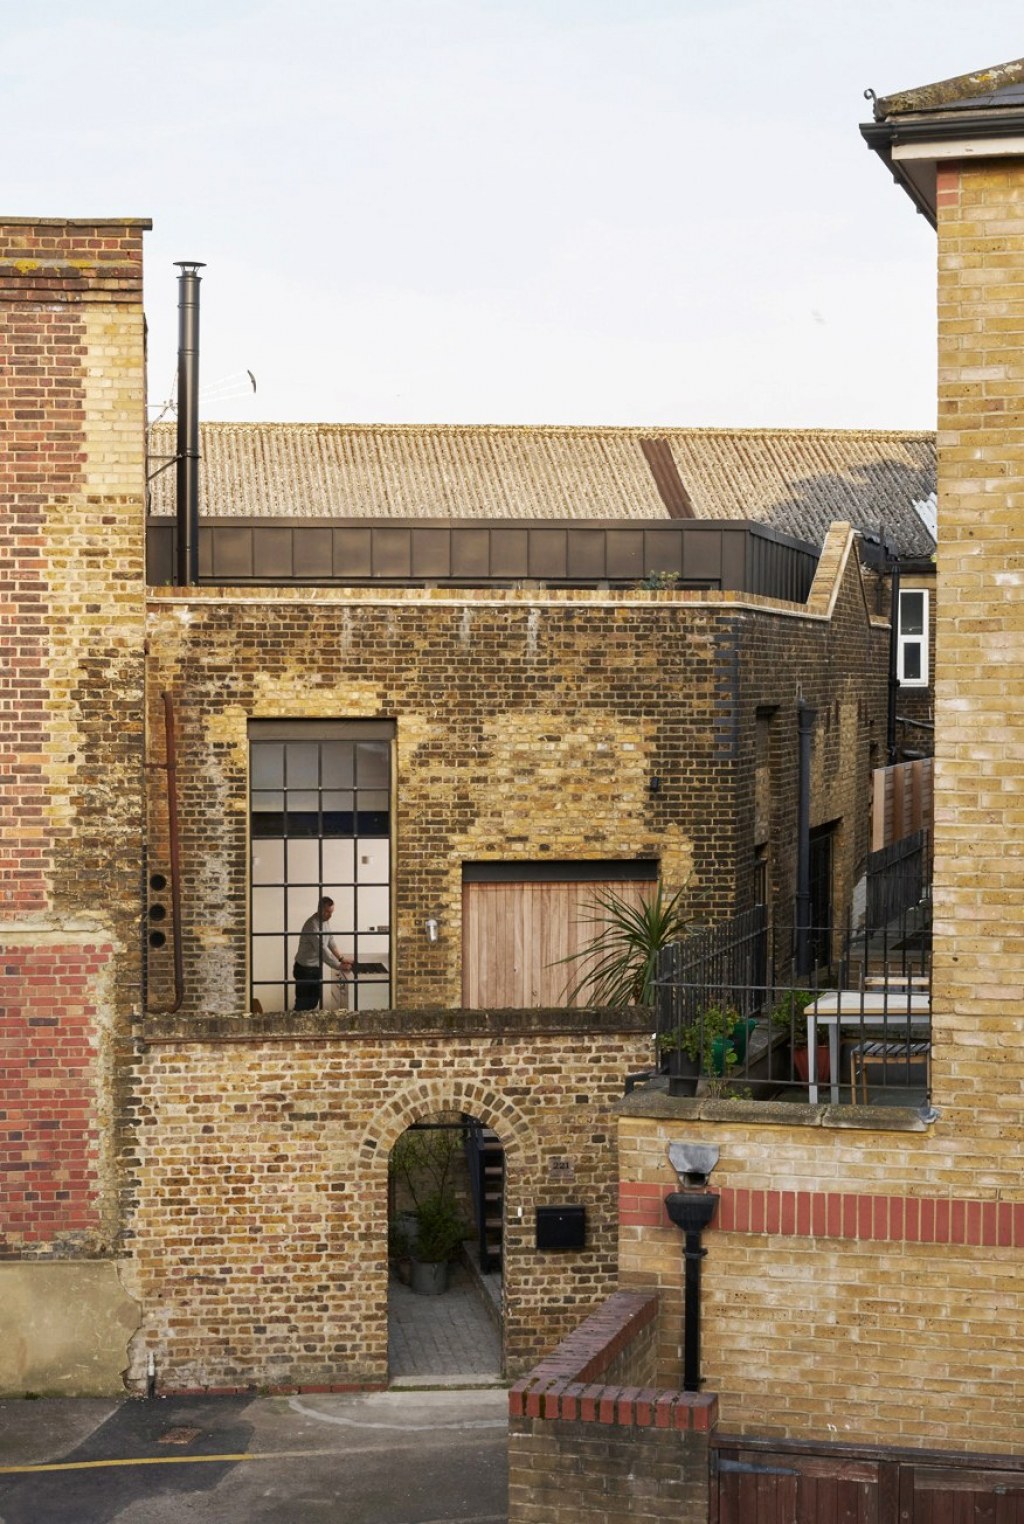 The Gin Distillery London / The exterior façade has been repaired with a brick patchwork